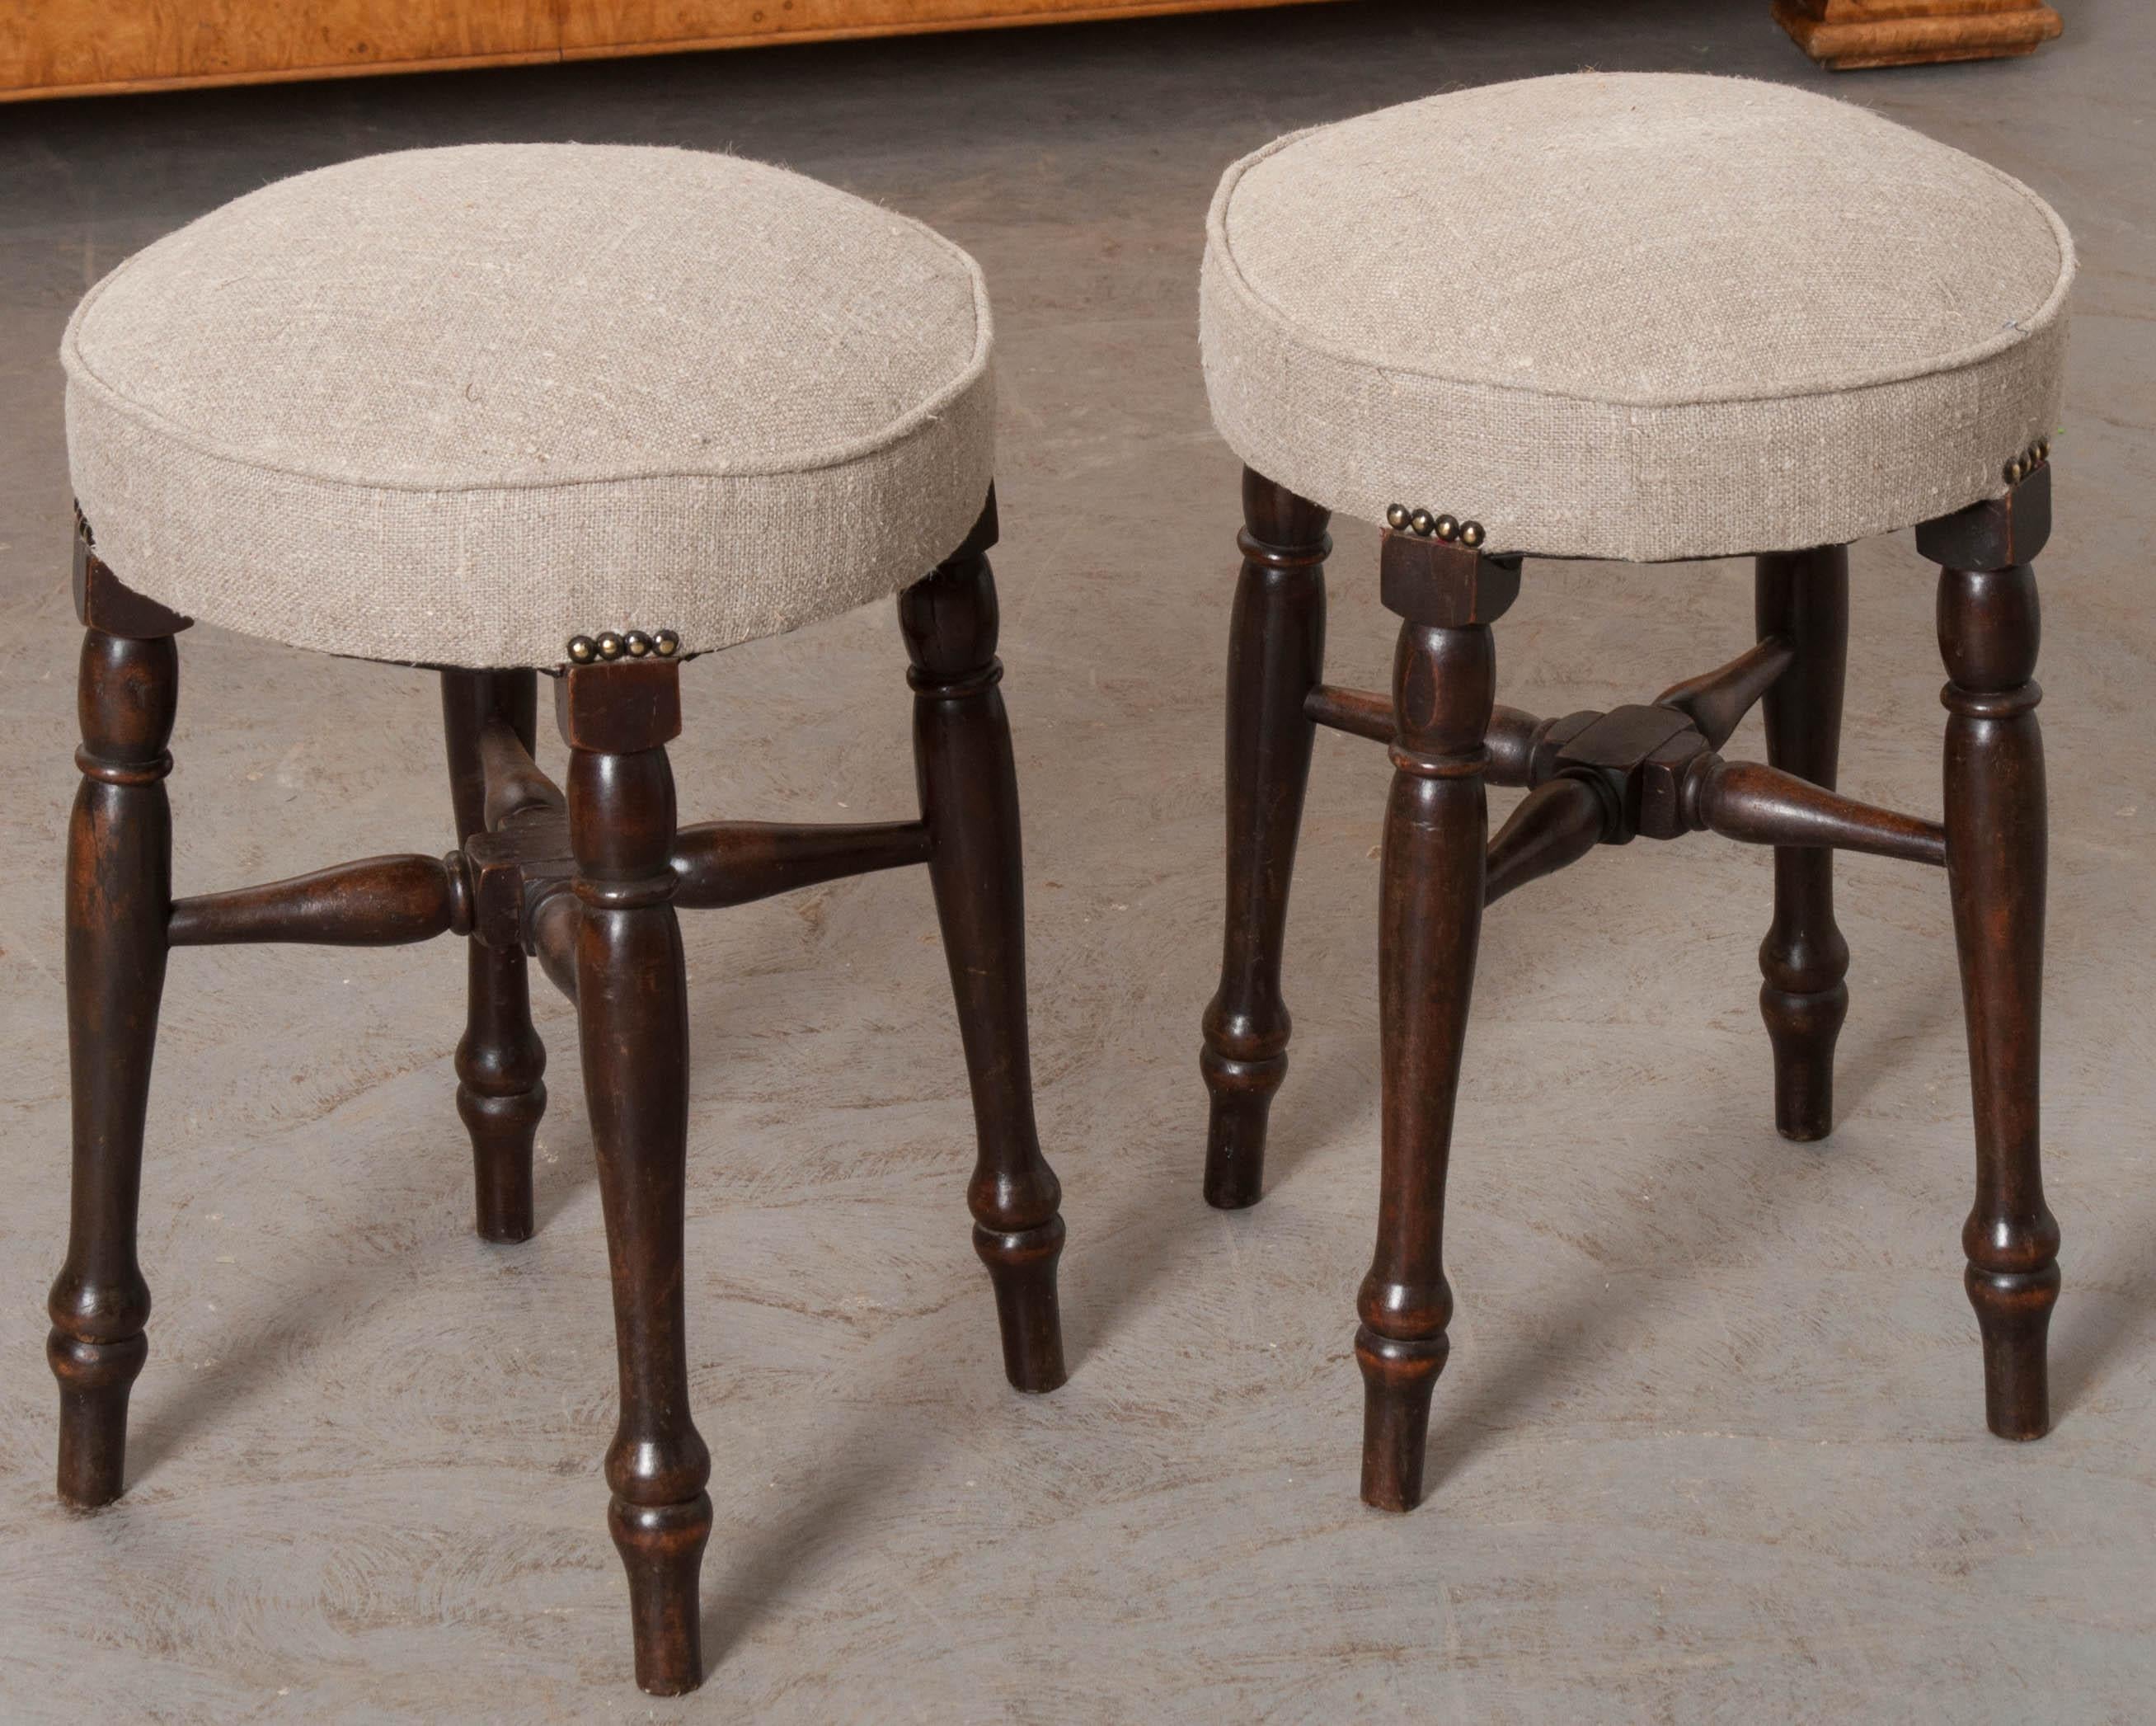 A fun pair of upholstered English stools, made in England, circa 1890. They both have baluster-form turned mahogany legs that are braced by turned mahogany stretchers. The pair have been recently upholstered in a natural slubby linen with single